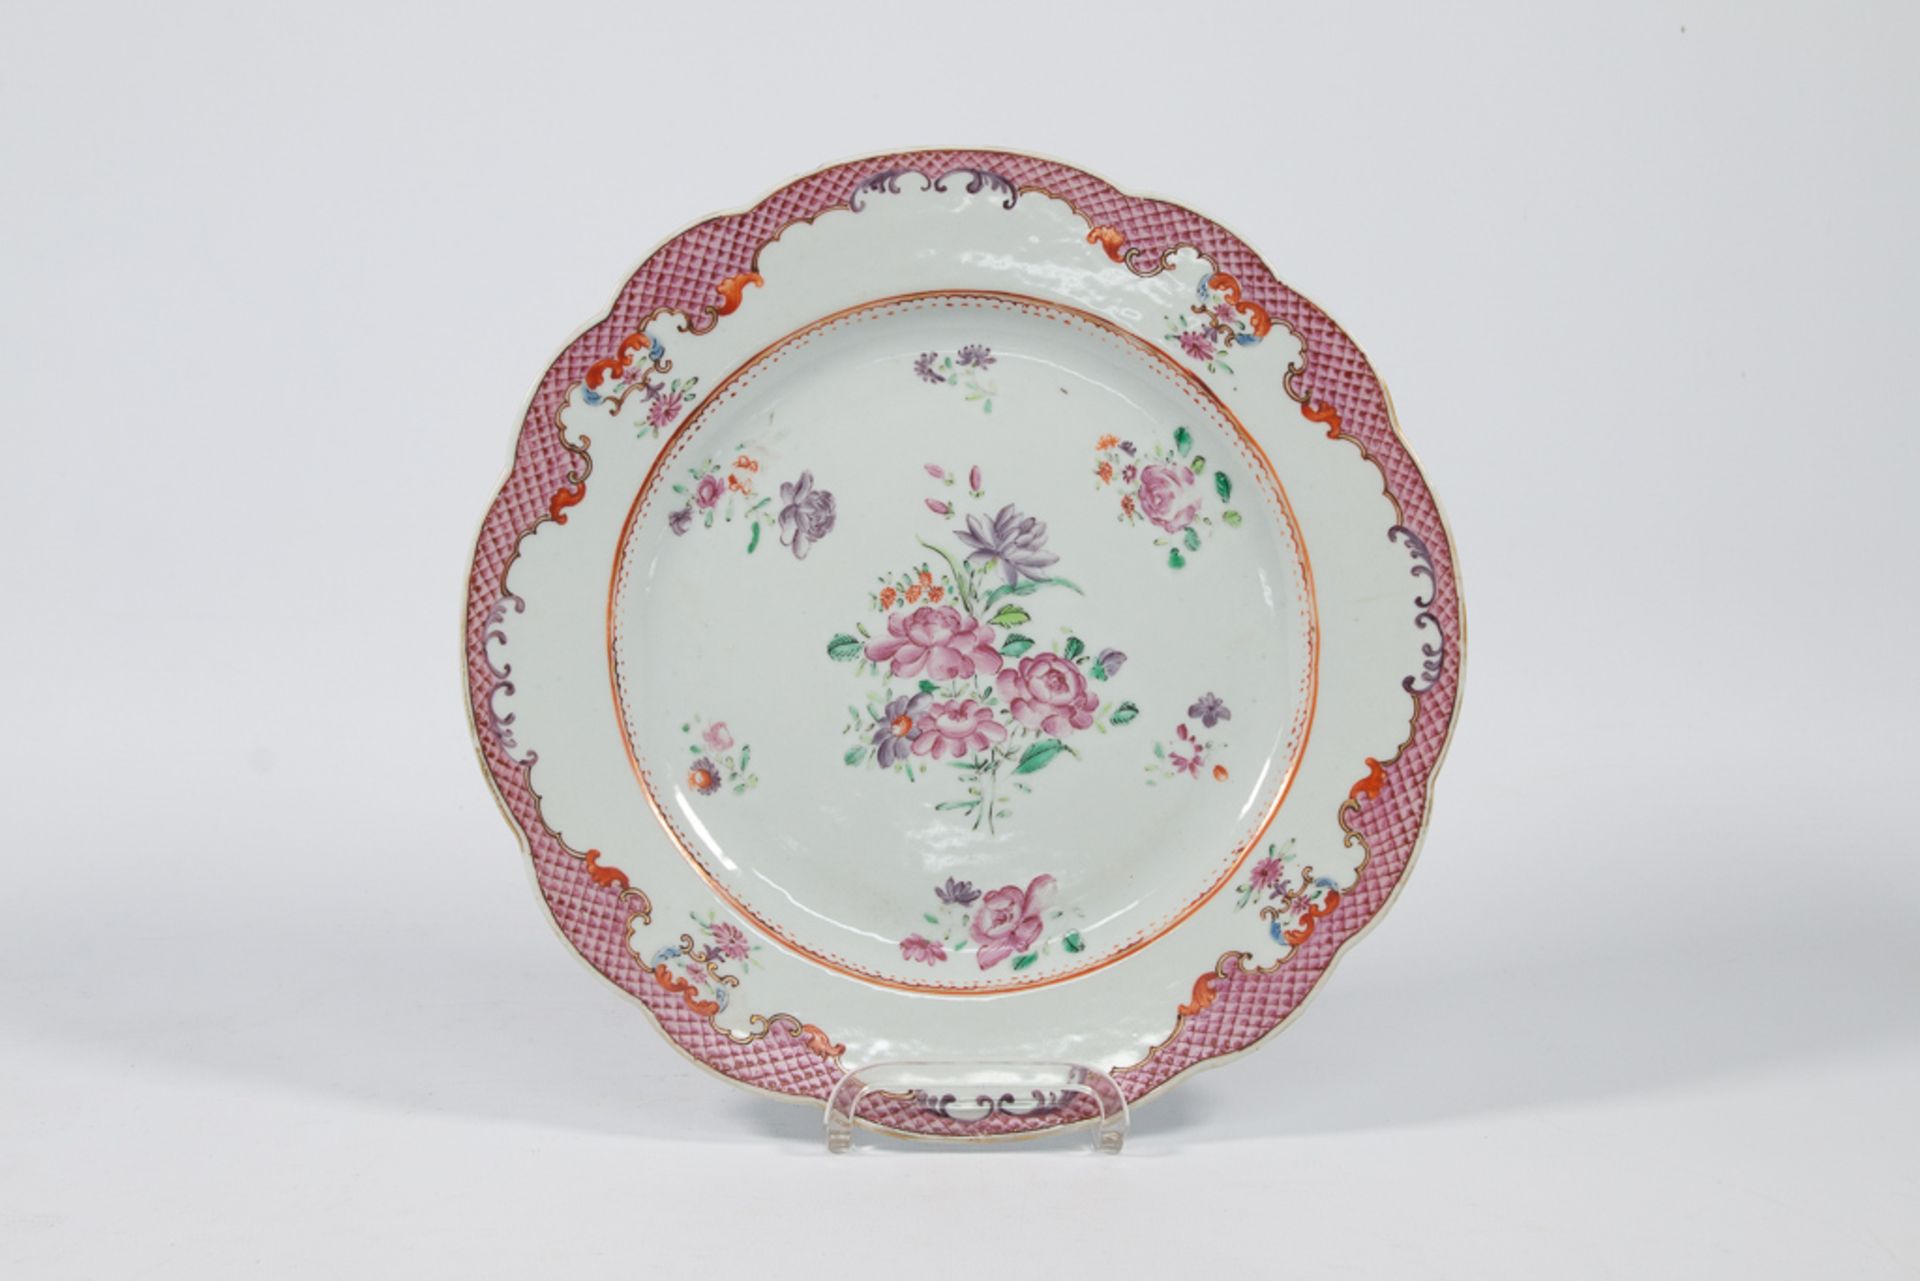 Collection of 5 Famille rose plates - Image 6 of 33